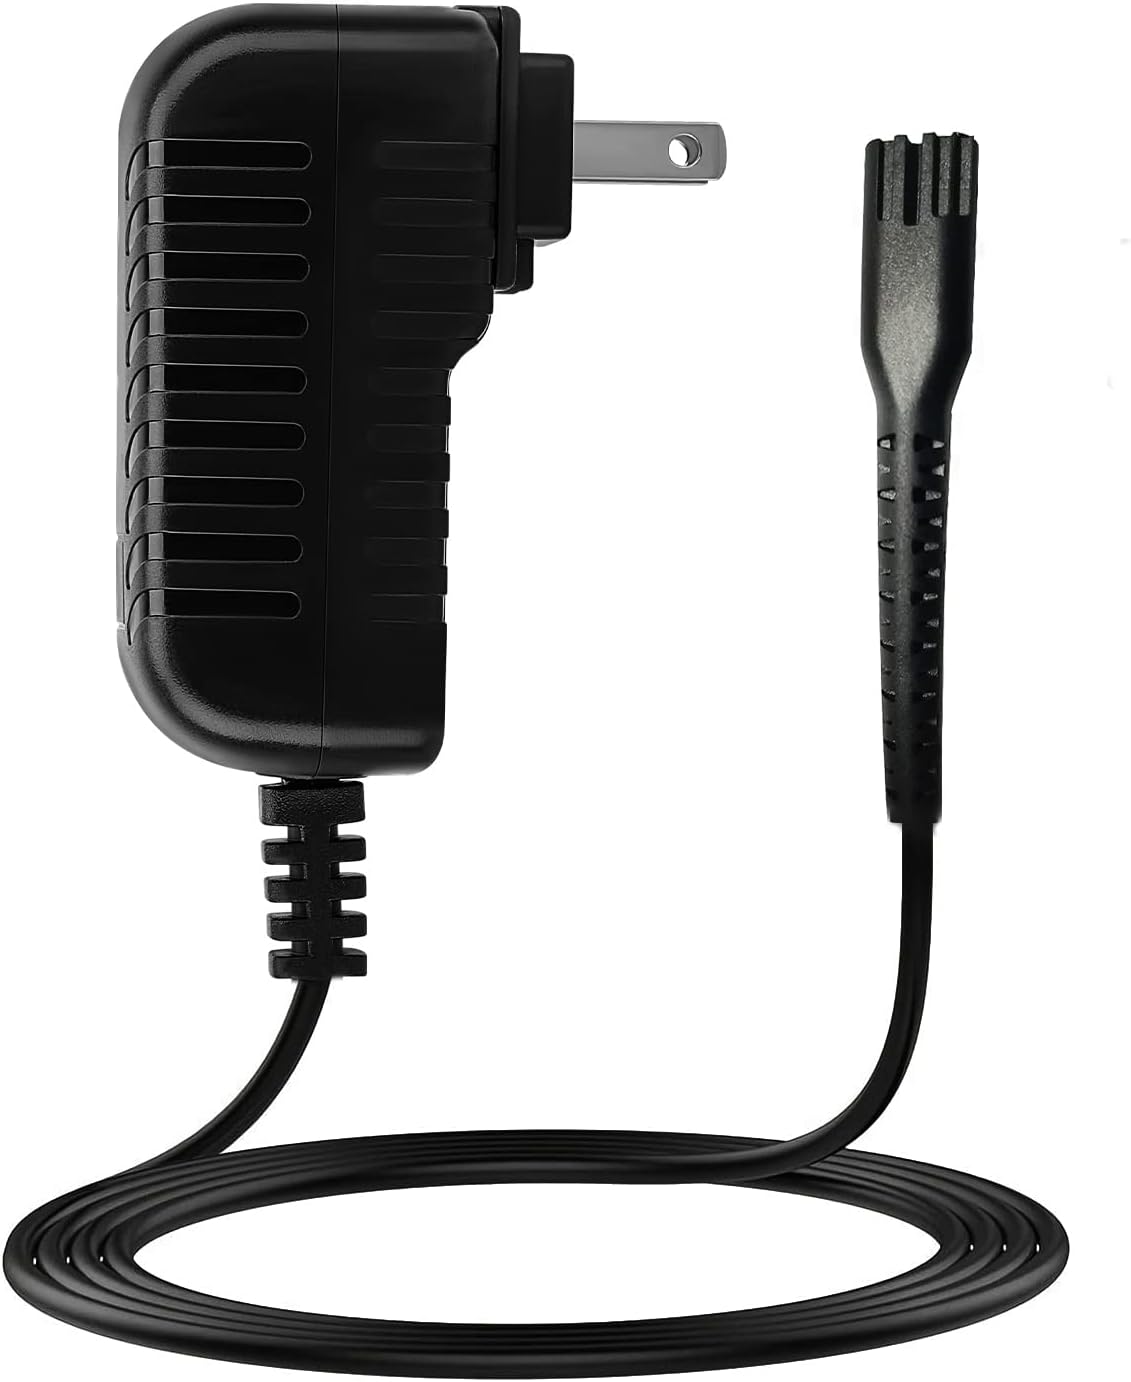 for Wahl Cordless Clippers Charger, Professional Replacement 4V Clipper Charger Cord for All Wahl Magic Clip Senior Ster - Click Image to Close